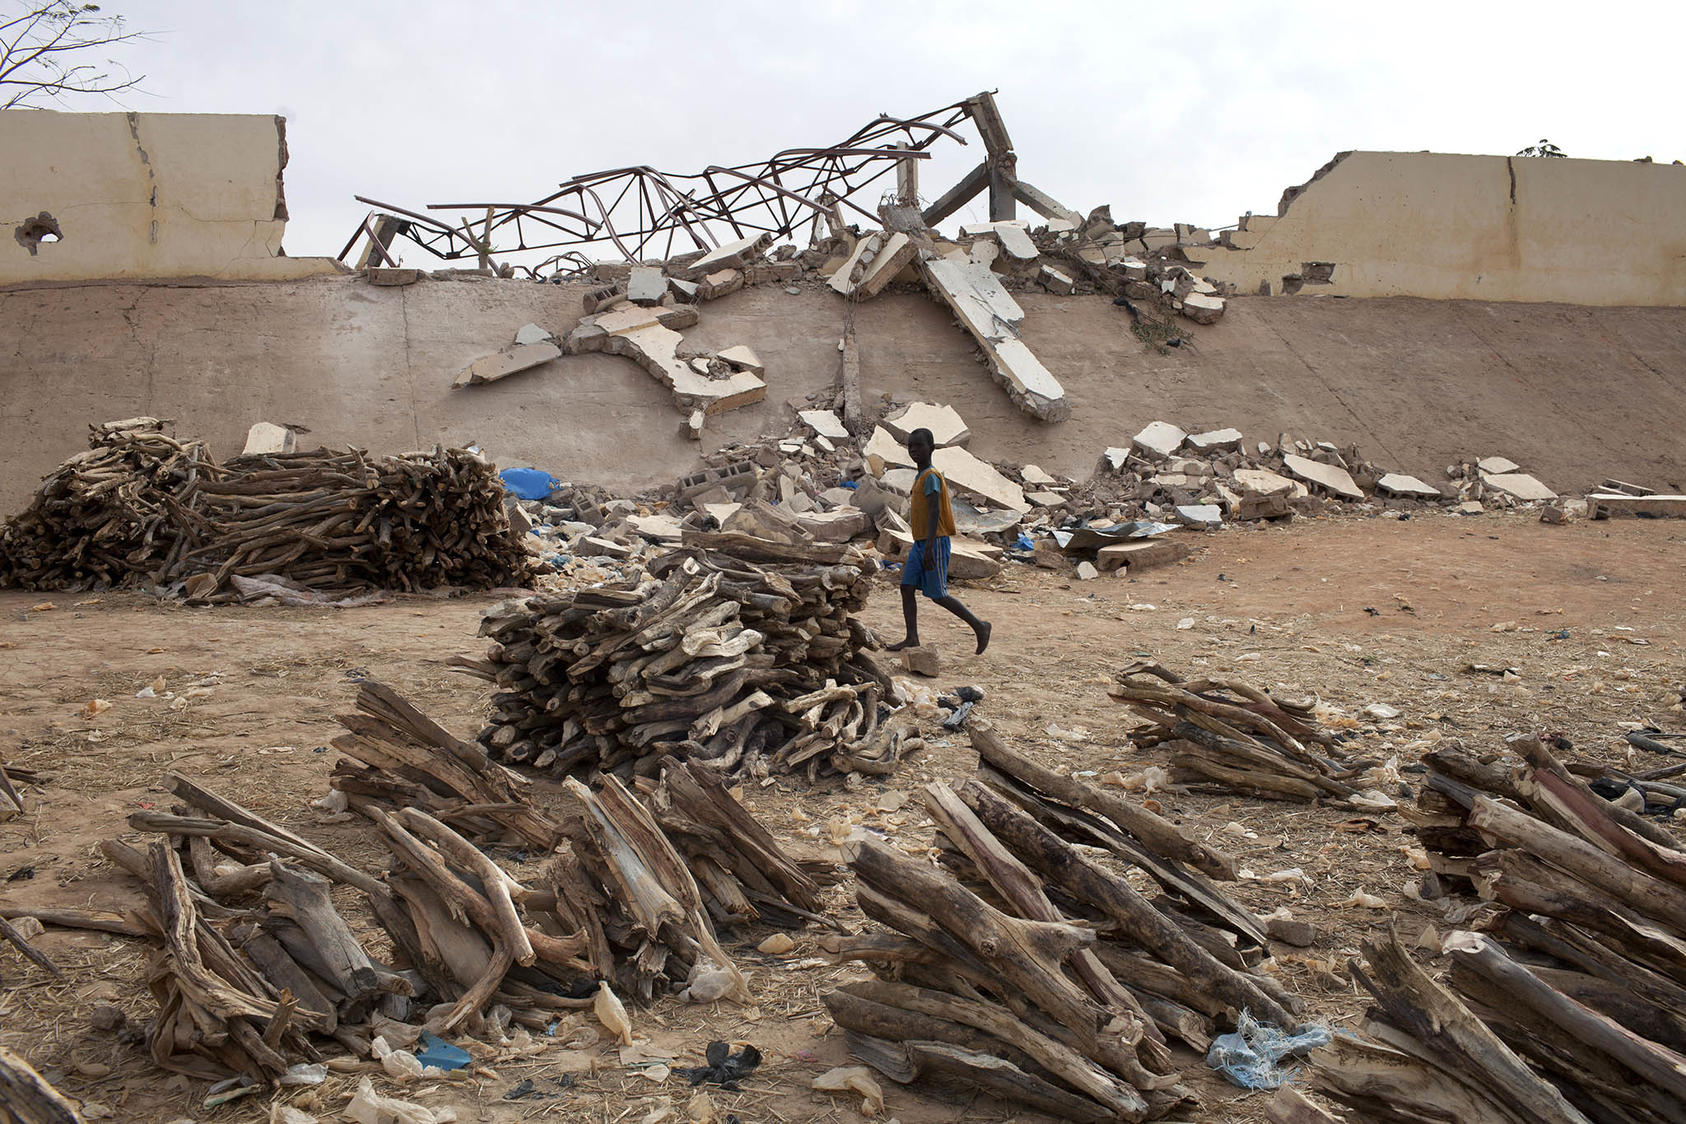 A market in the town of Konna stood ruined at the start of Mali’s decade-long insurgencies. Algeria has mediated in those conflicts and shares some, but not all, U.S. interests in stability there and across the Sahel. (Tyler Hicks/The New York Times)